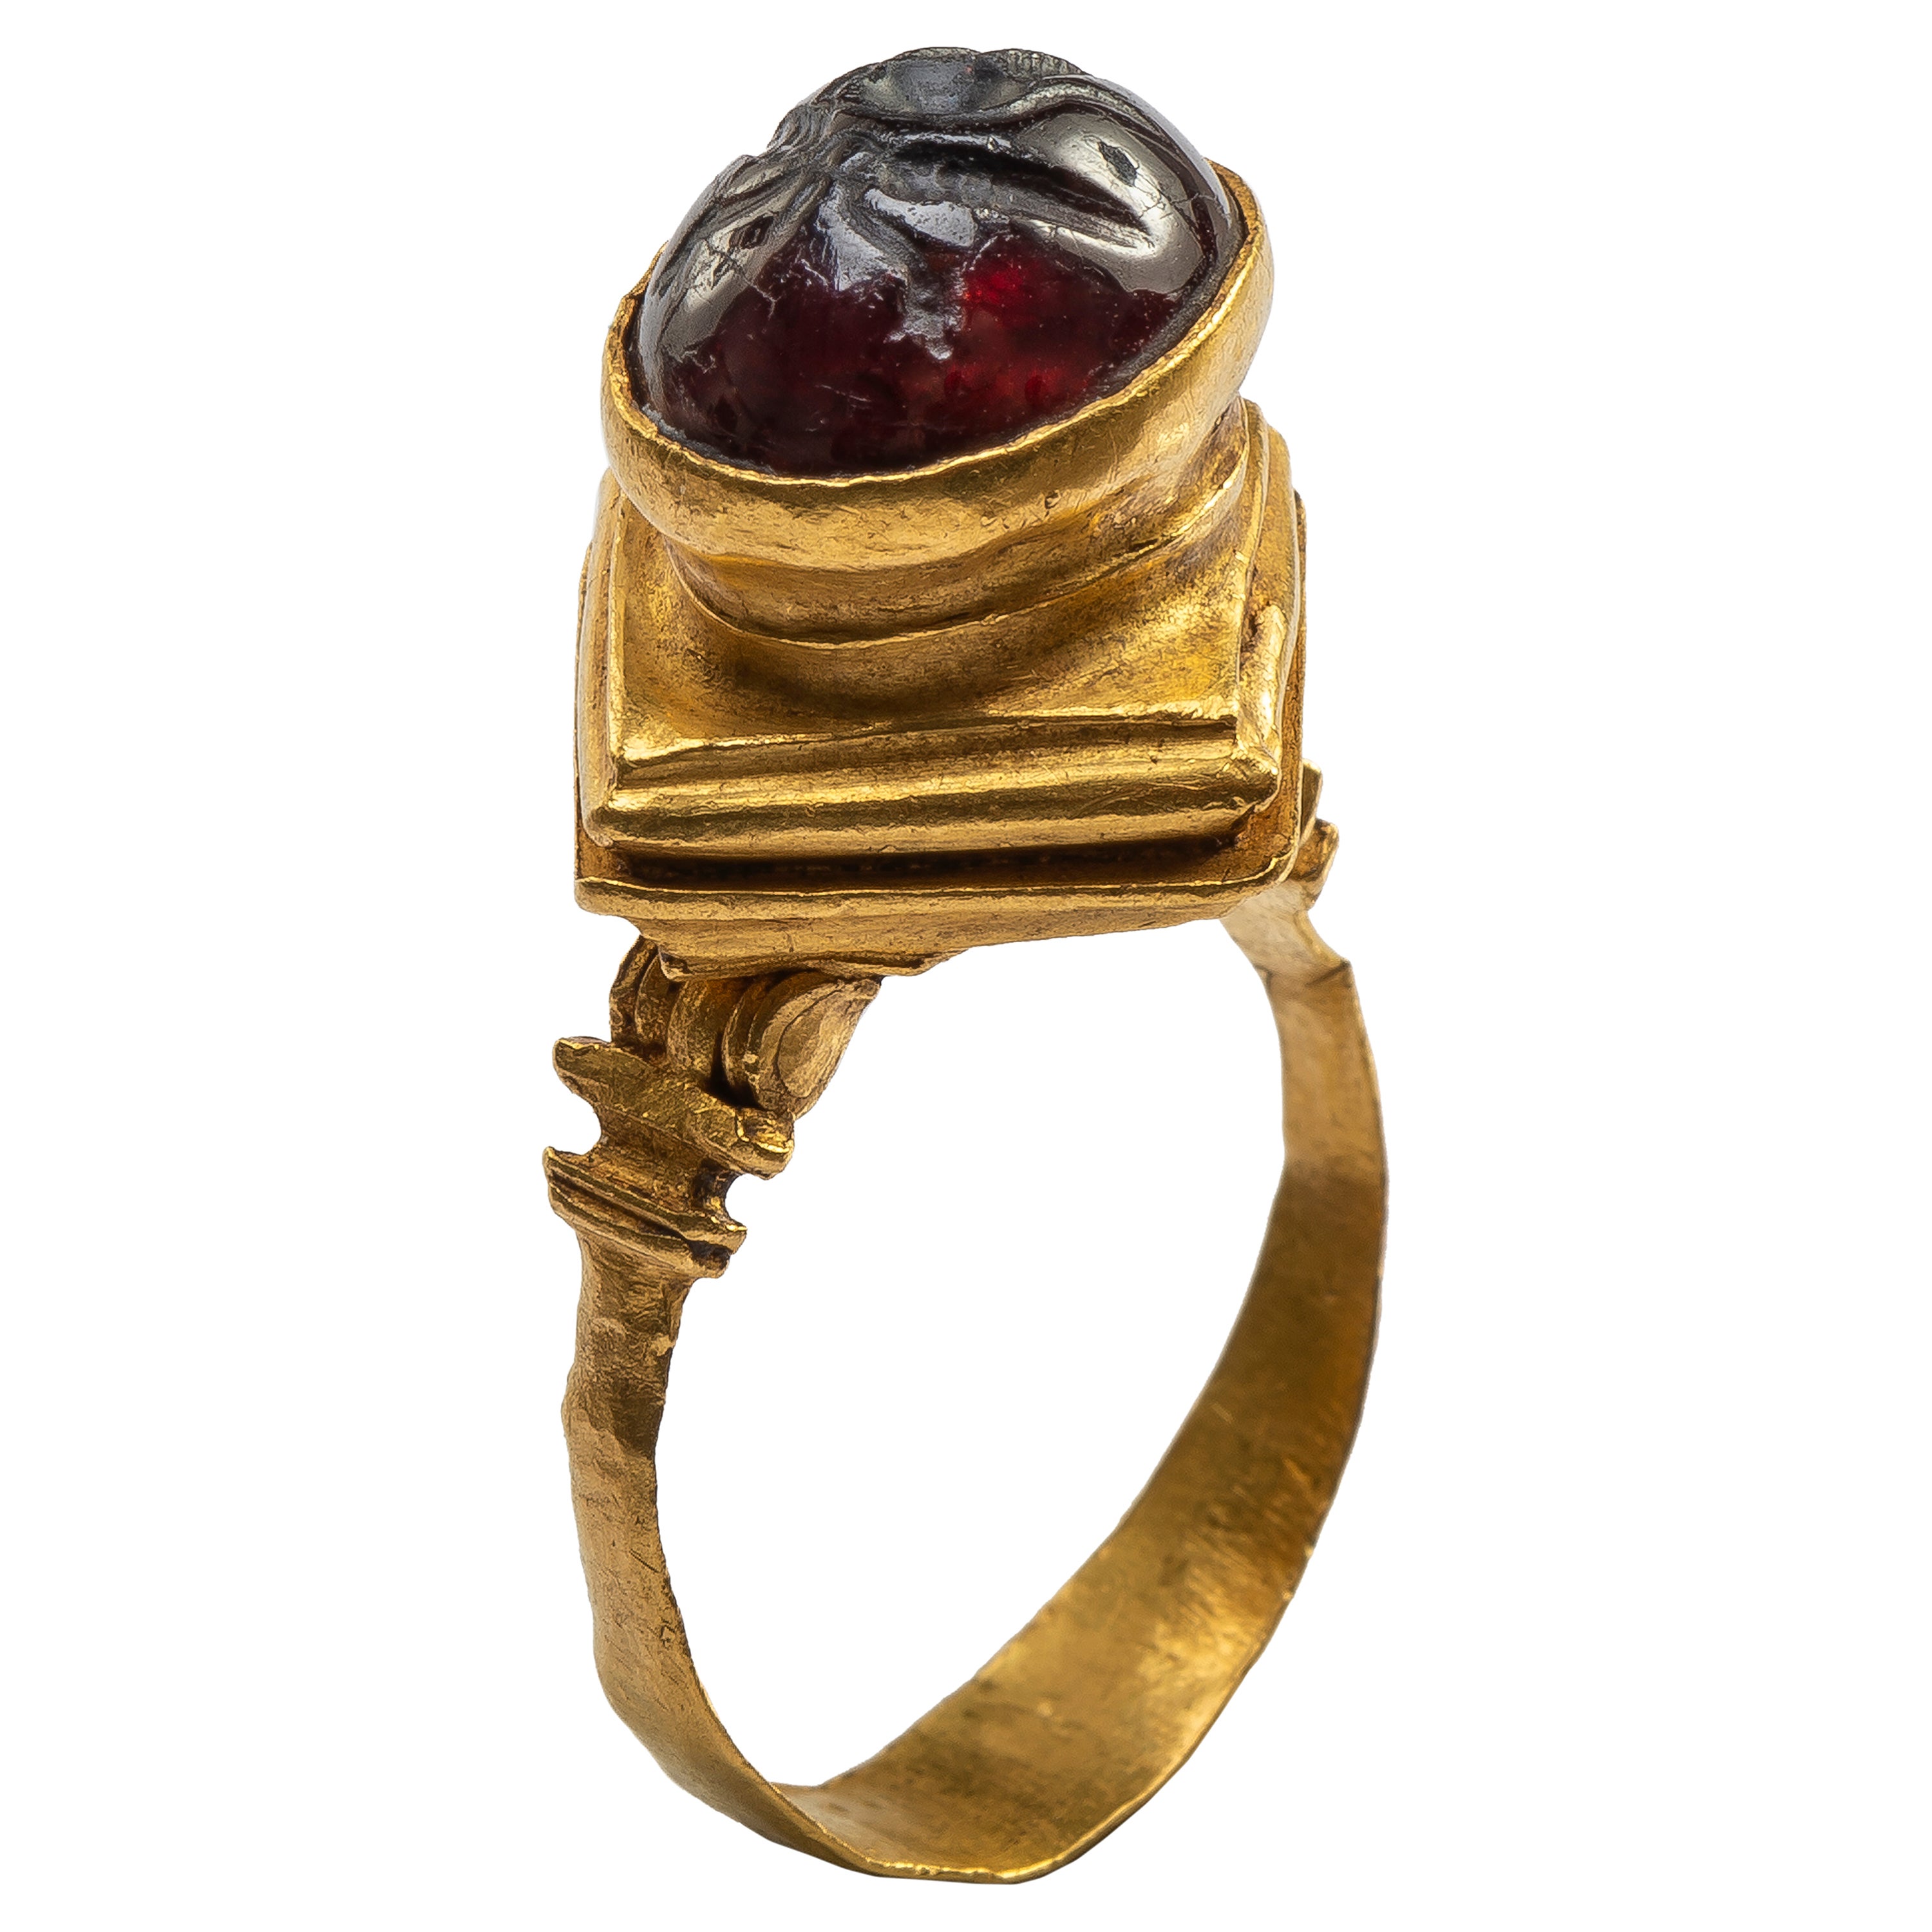 Gold Hellenistic Ring with Garnet Intaglio